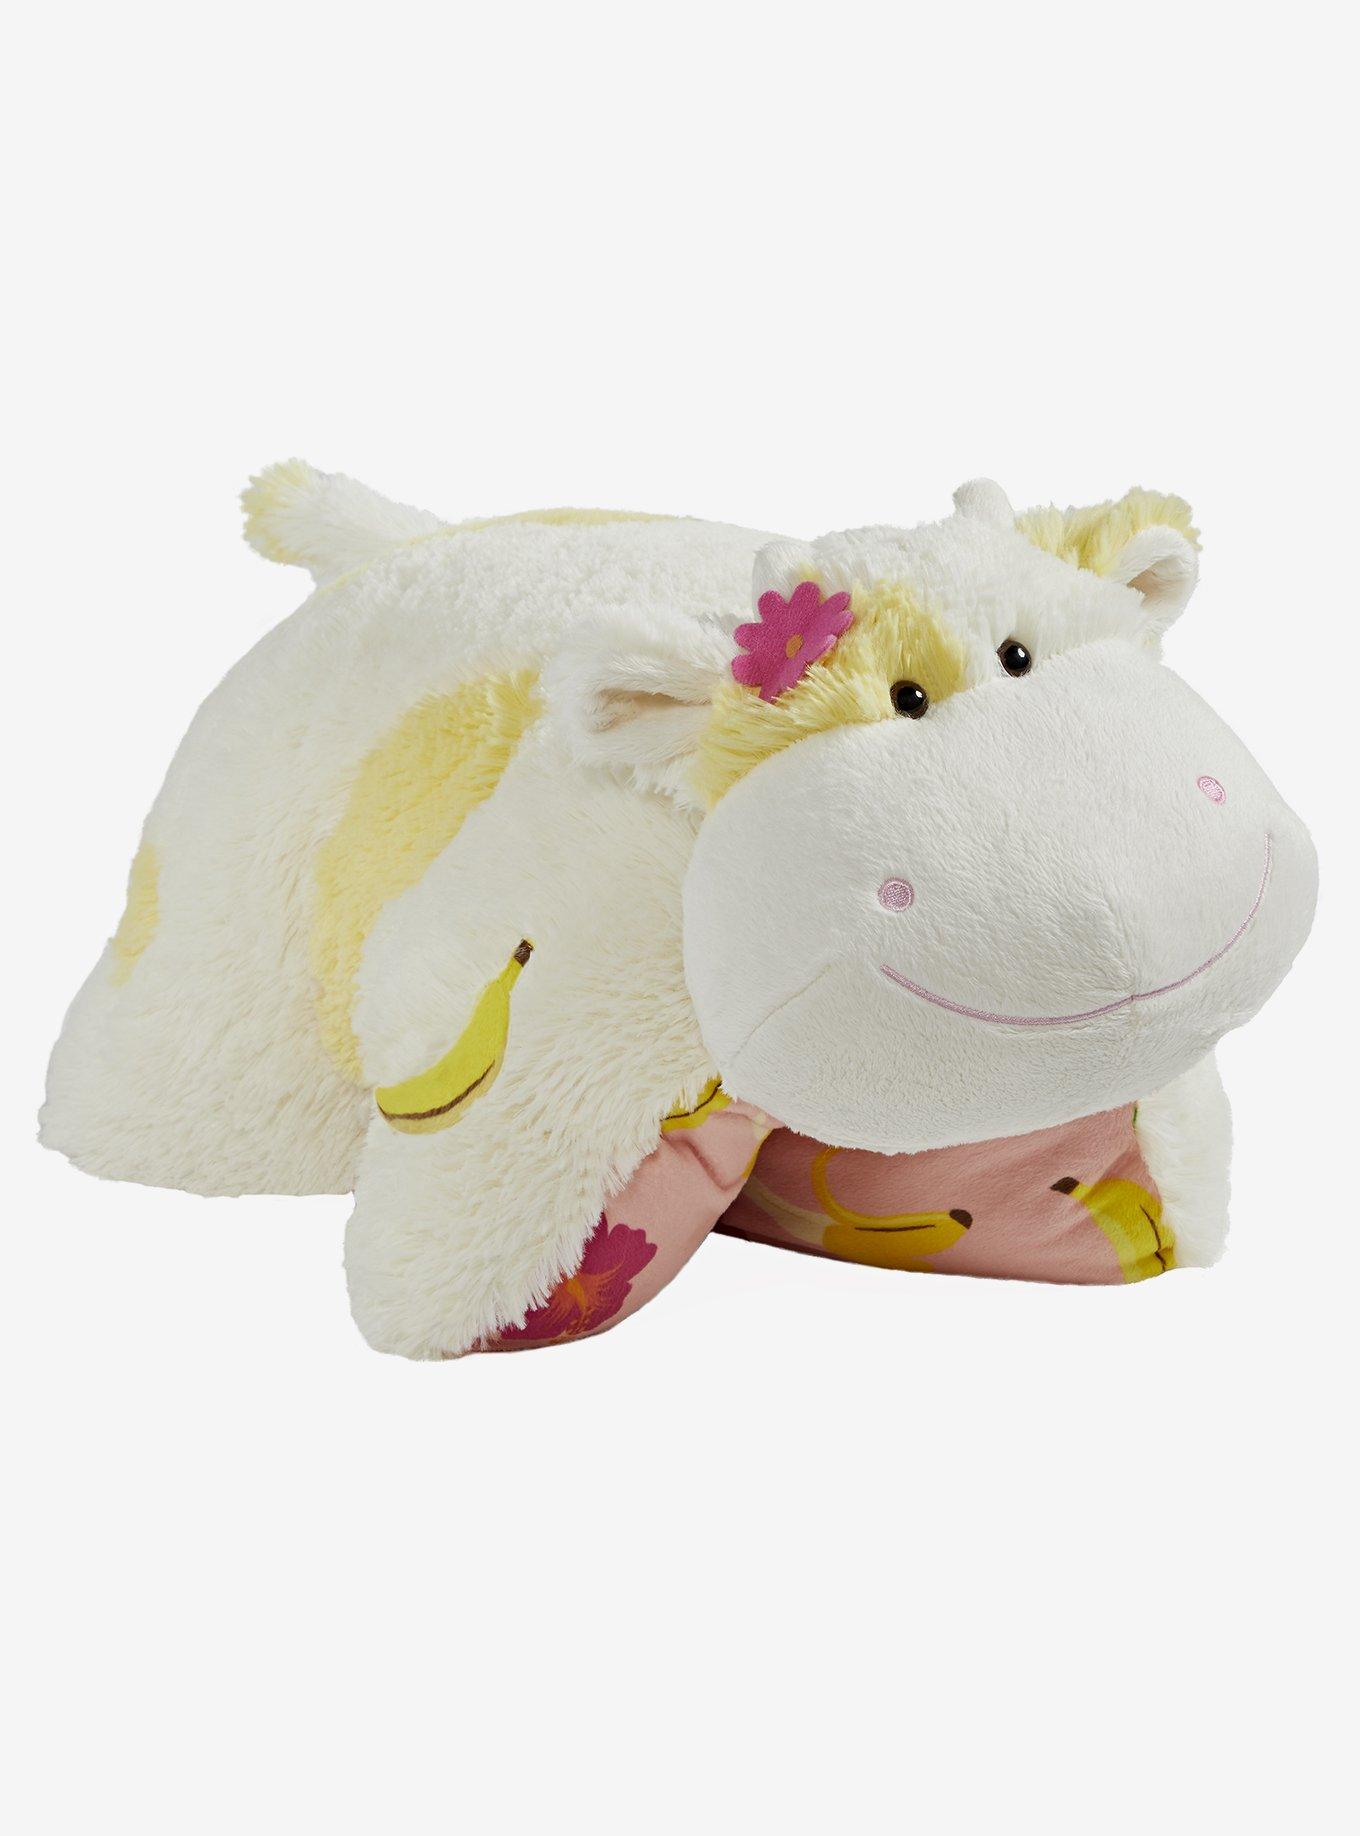 Sweet Scented Banana Cow Pillow Pets Plush Toy